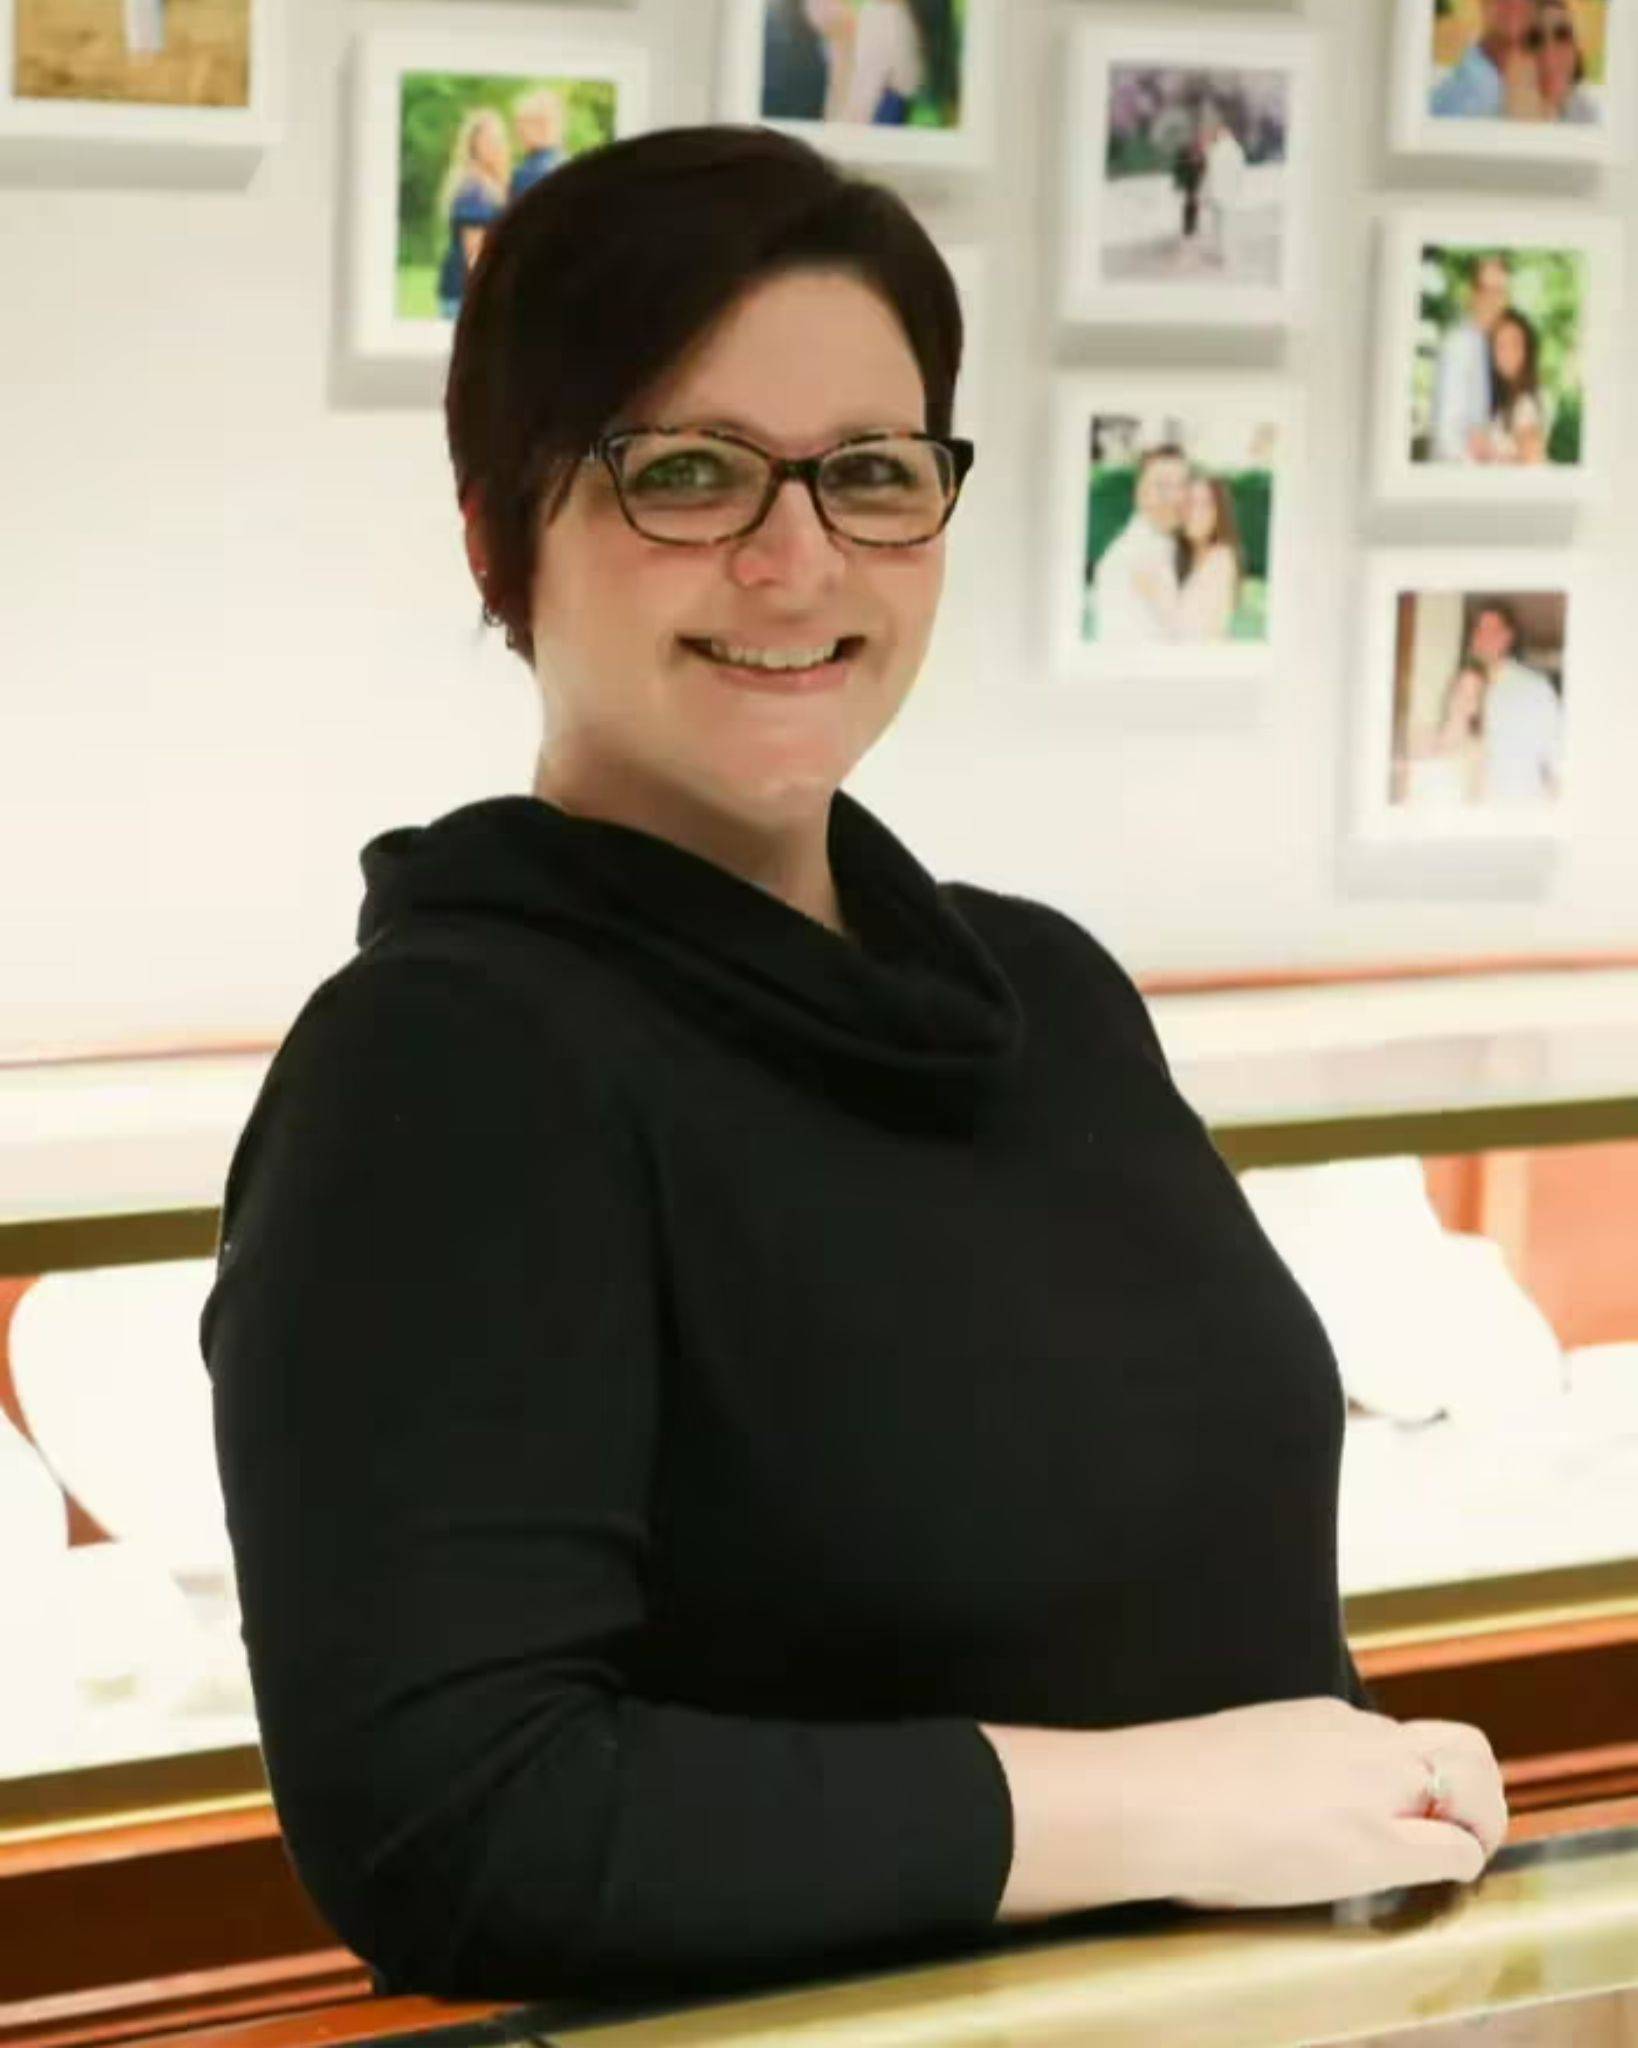 Christine Spicuzza Marketing Manager, Applied Jewelry Professional - GIA at Henne Jewelers